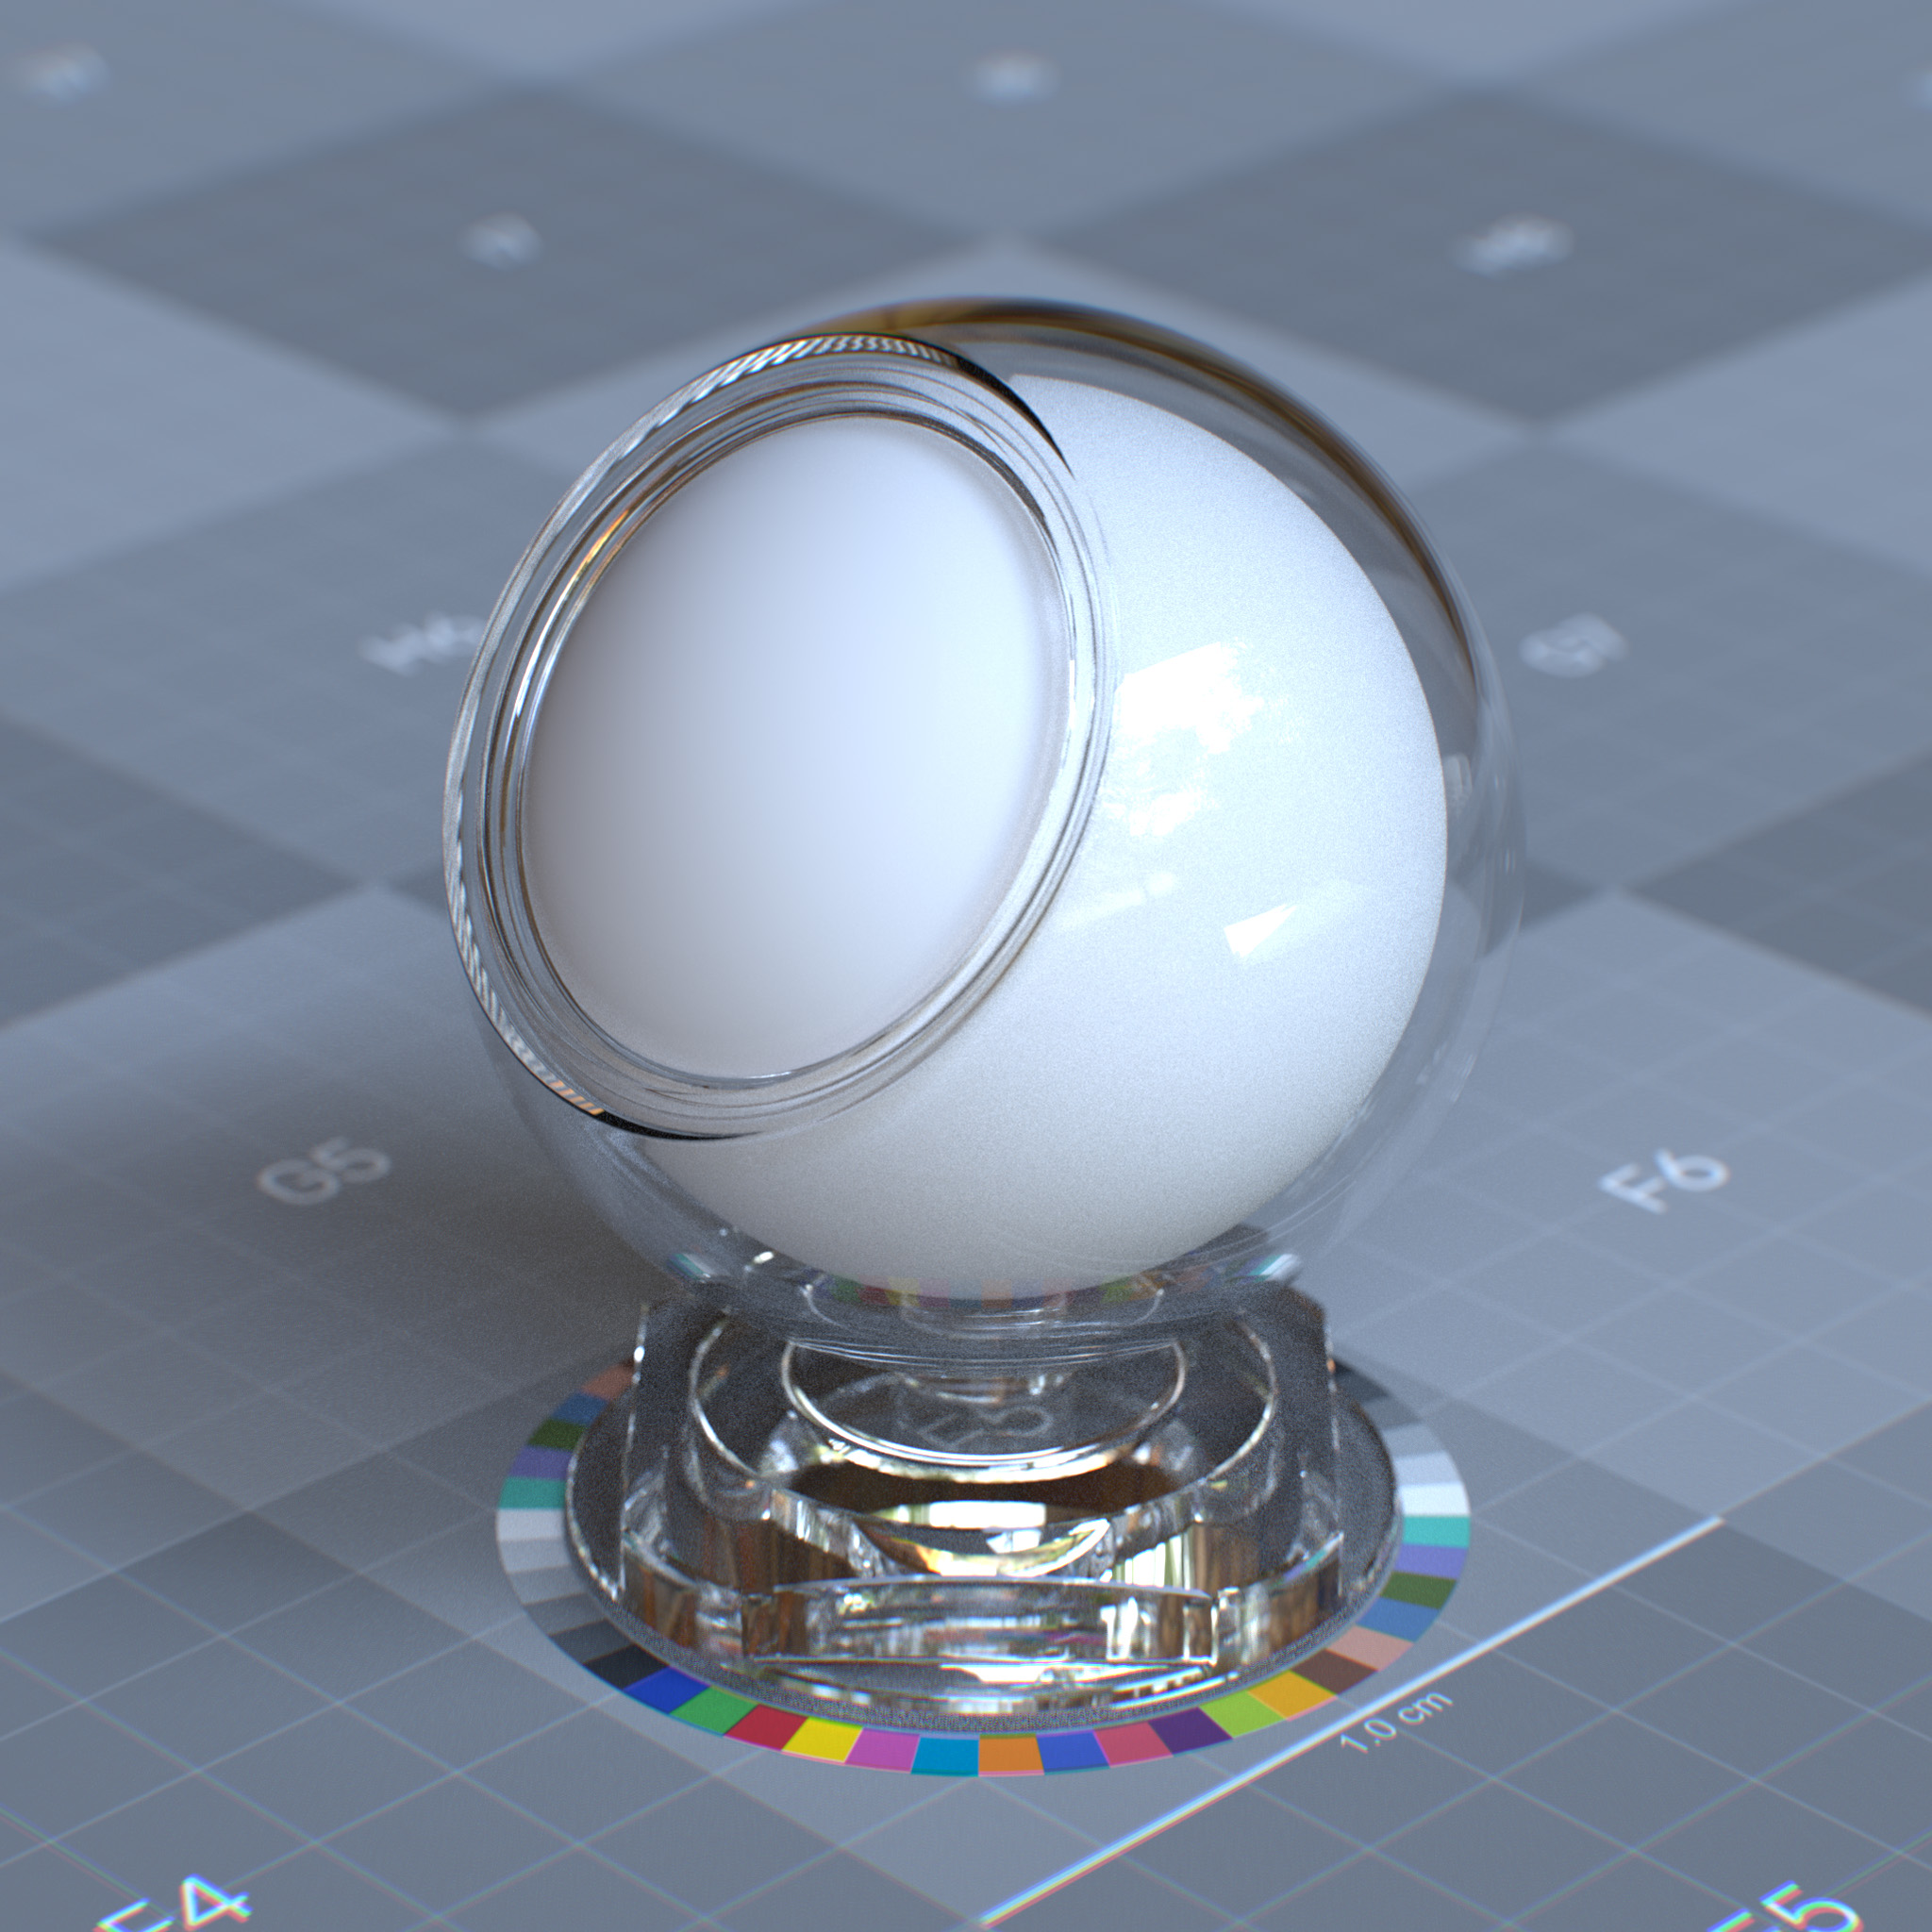 rtx_material_omnisurfacebase_specular_reflection_roughness_0p0_refraction